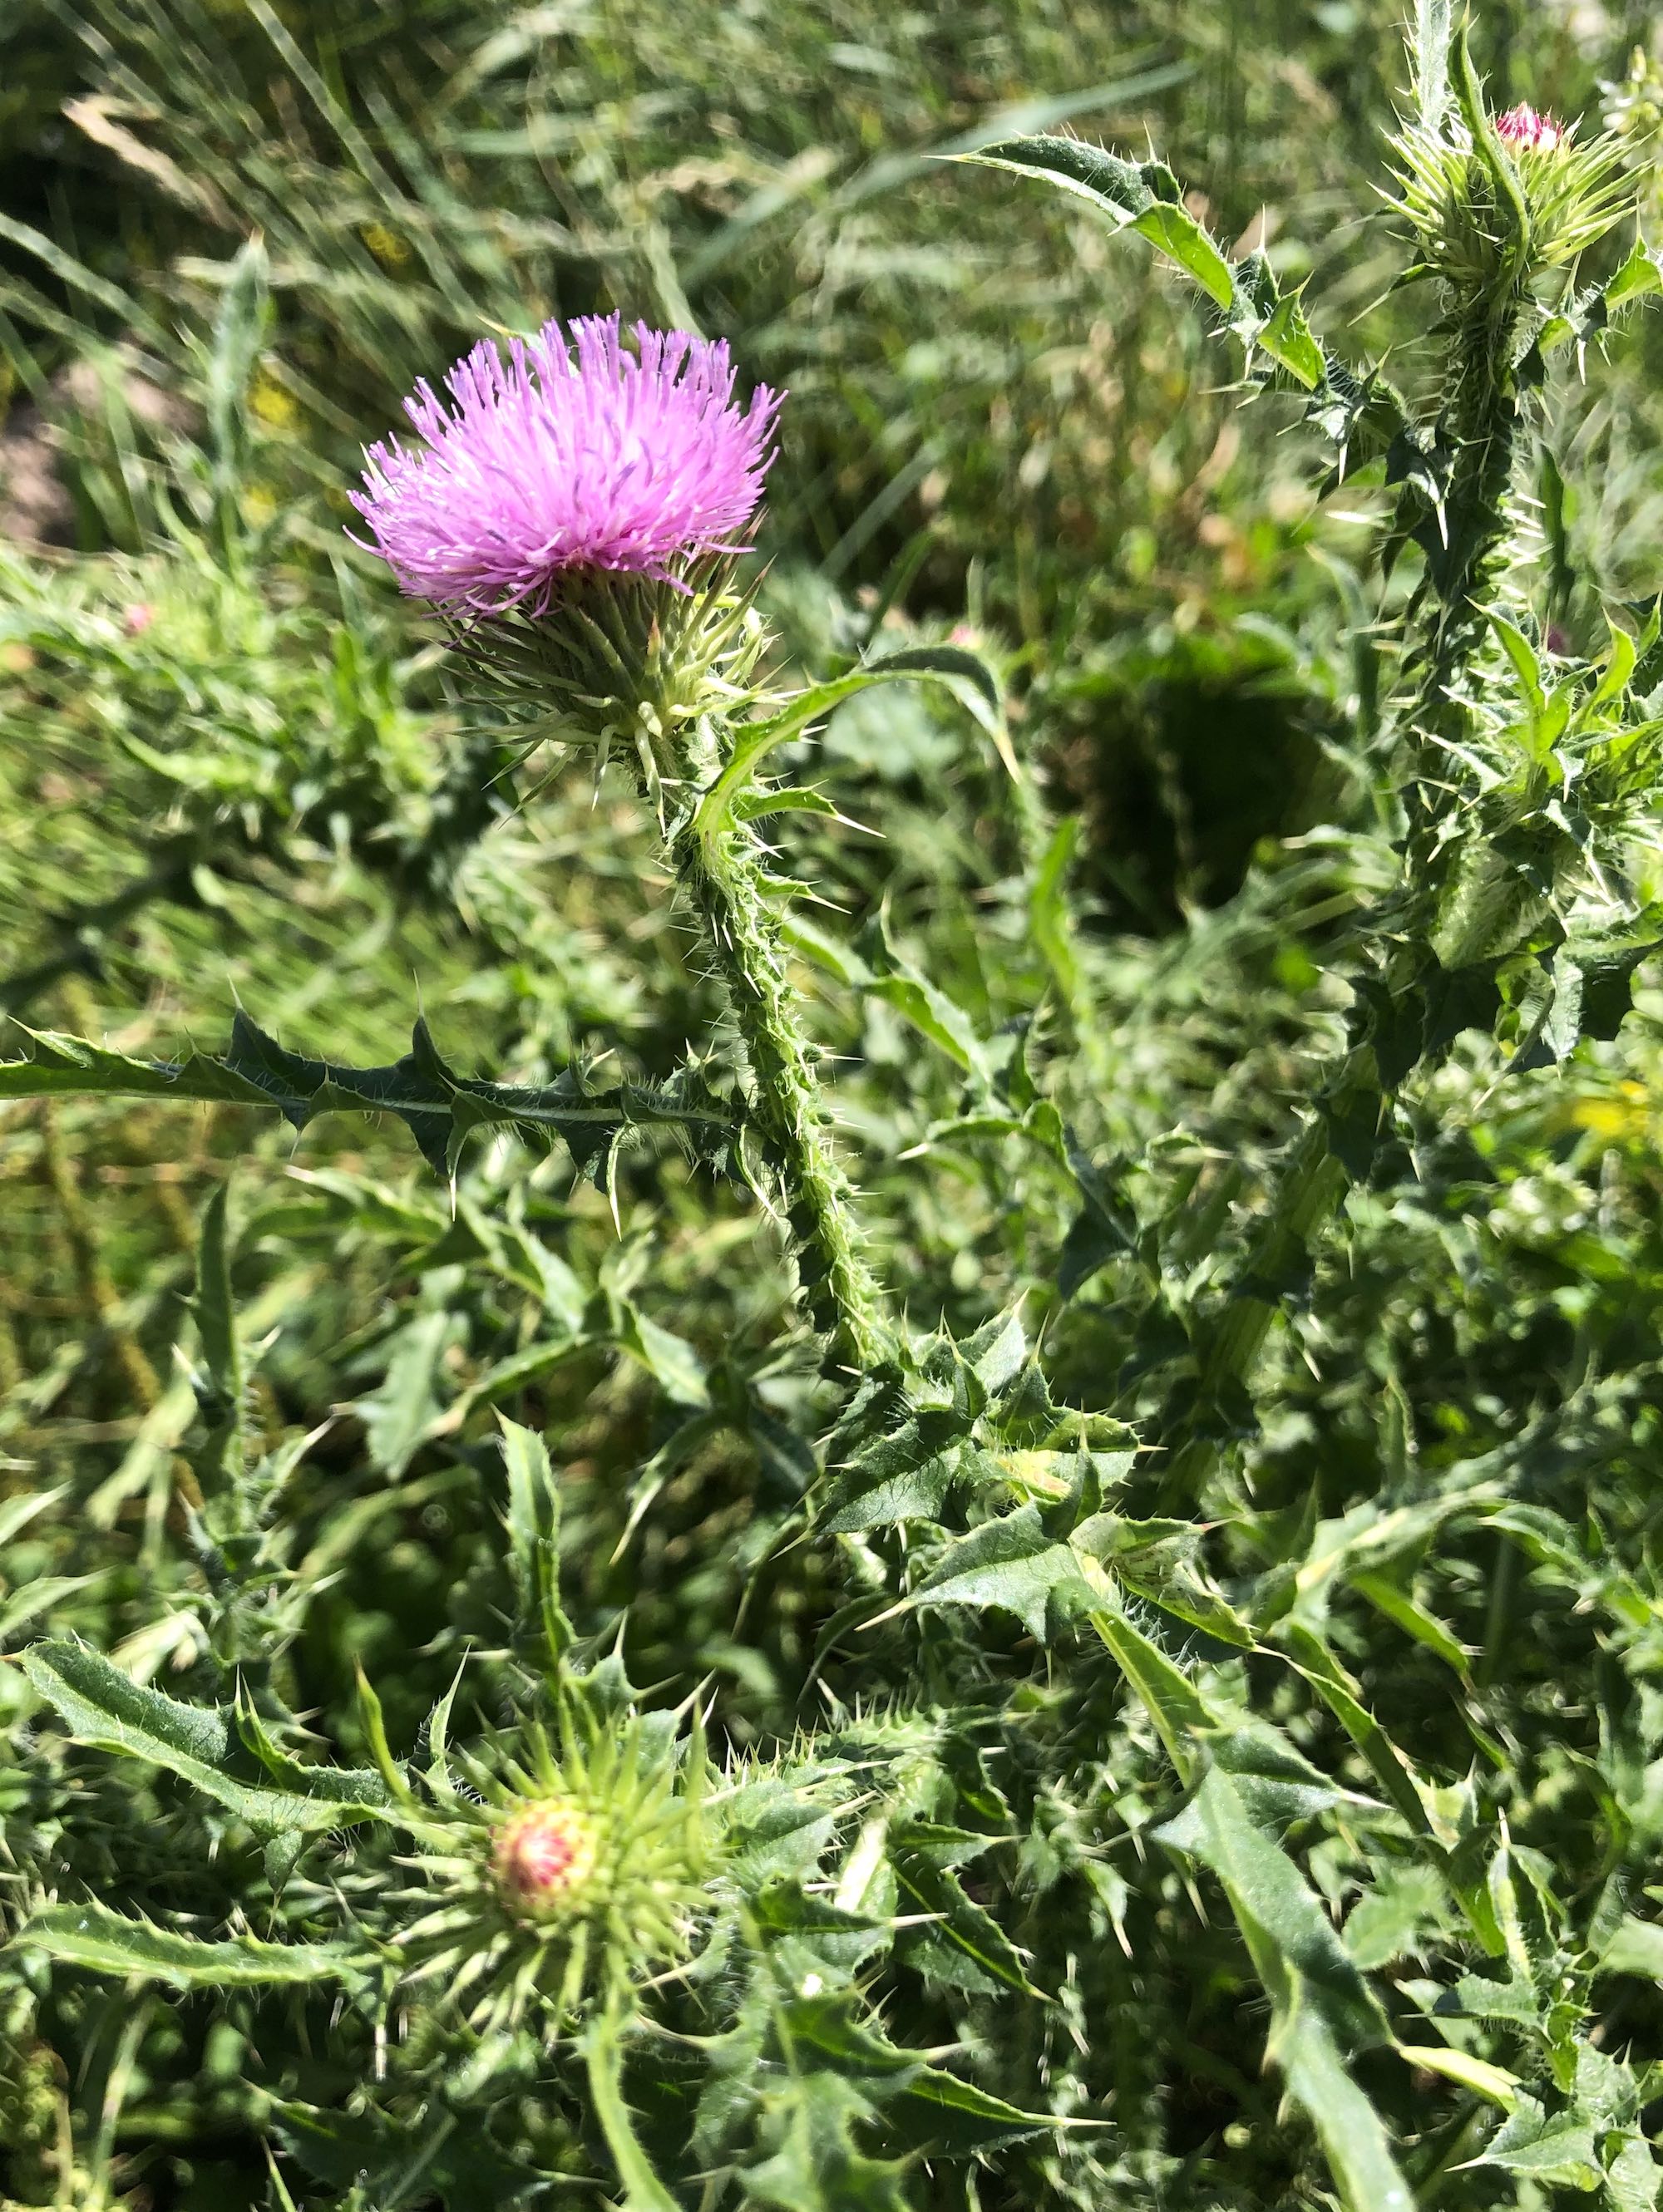 Plumeless Thistle by Wingra Boats on shore of Lake Wingra in Madison, Wisconsin on July 10, 2019.